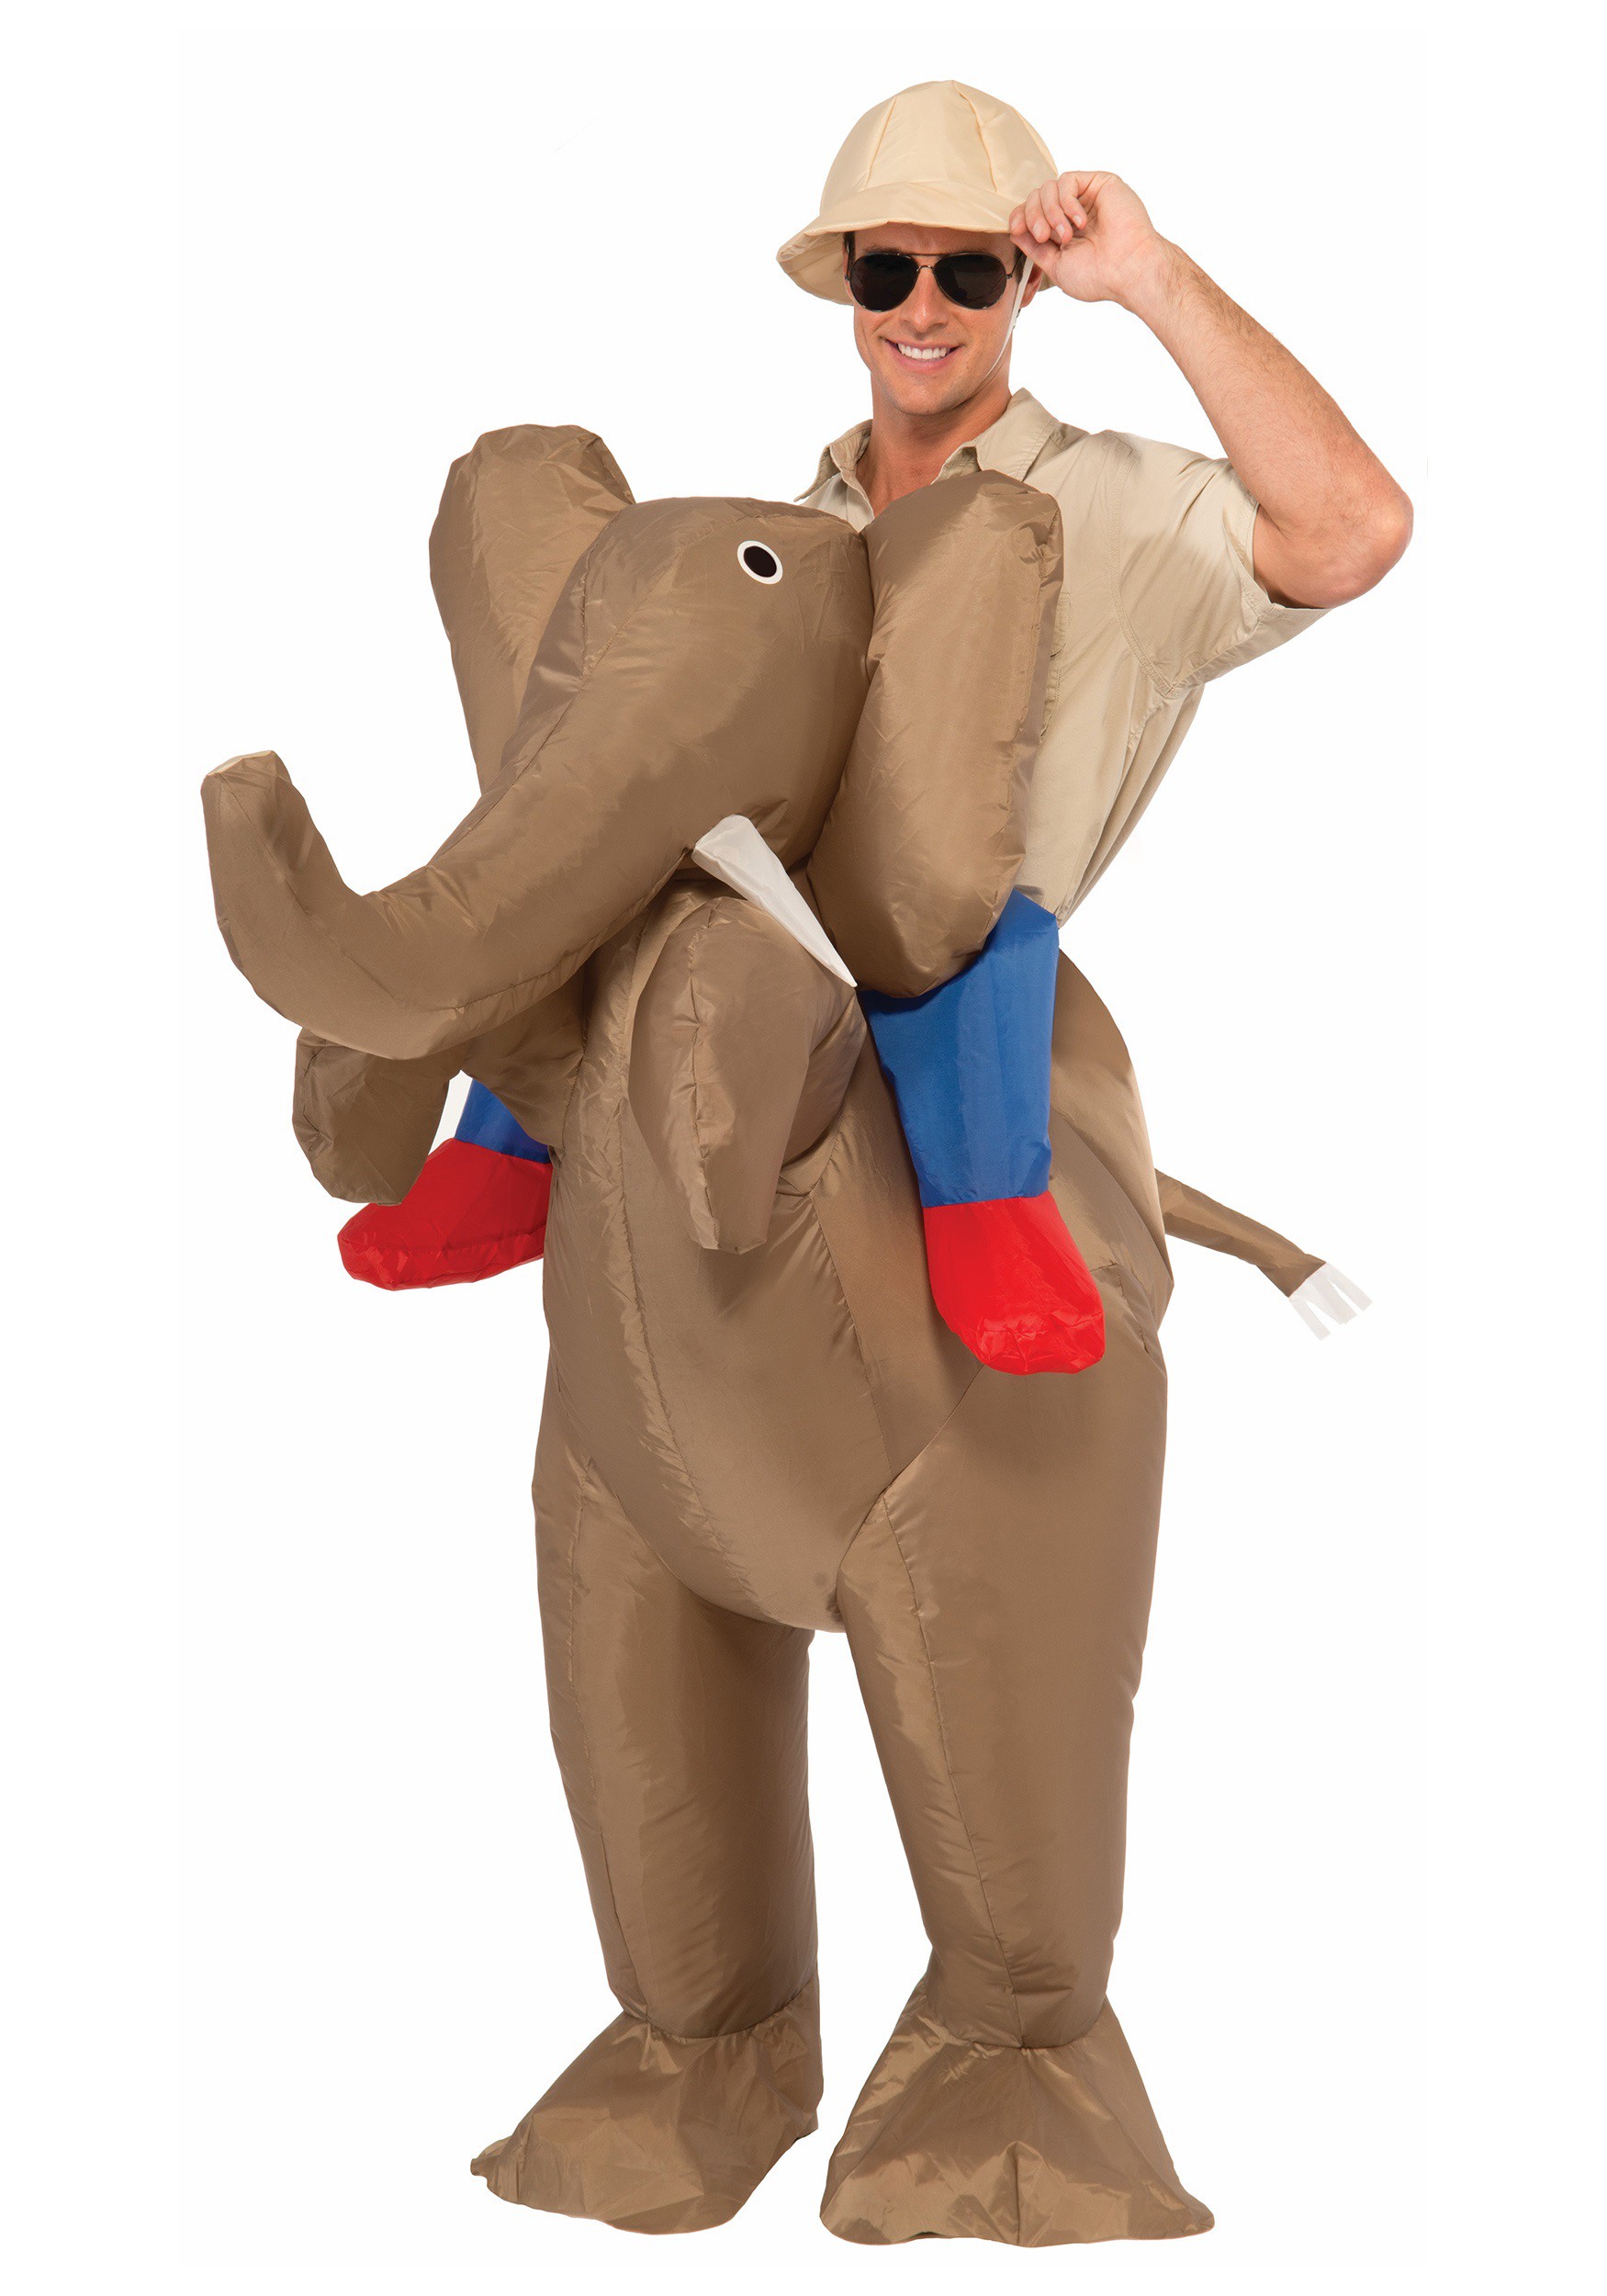 Elephant Costume Porn - Inflatable Ride An Elephant Adult Costume